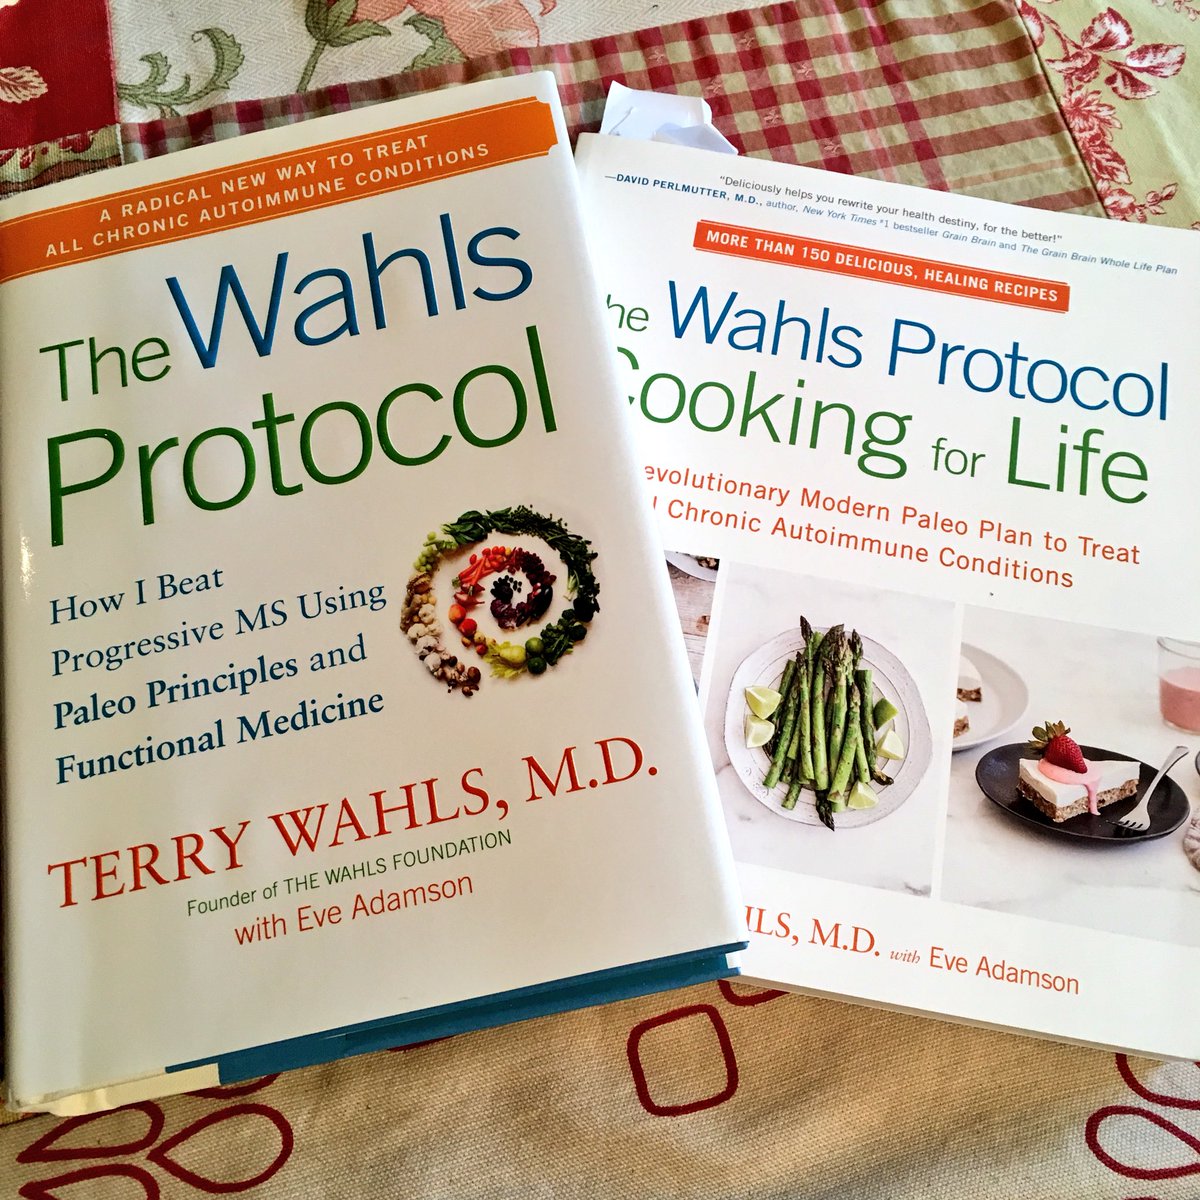 I’ve changed my diet to help manage my MS symptoms, thank you @terrywahls for all this insightful and interesting information. No dairy, no gluten, lots of leafy greens and REAL DOOD #WorldMSDay #thisisMS #WahlsProtocol #WahlsWarrior #spoonielife